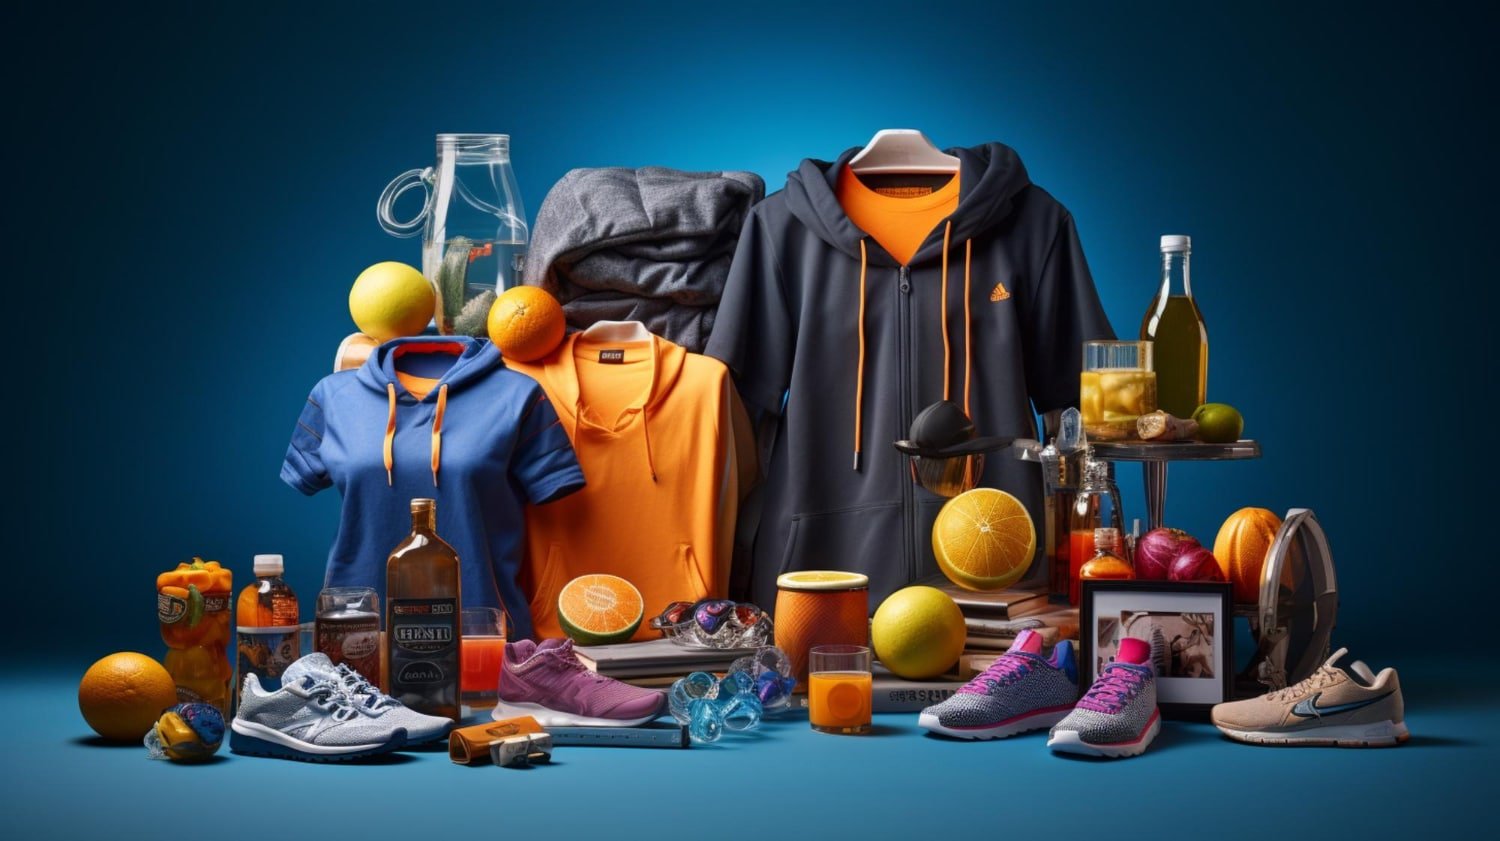 Shop For High-Quality Sporting Goods At SportsExperts.ca